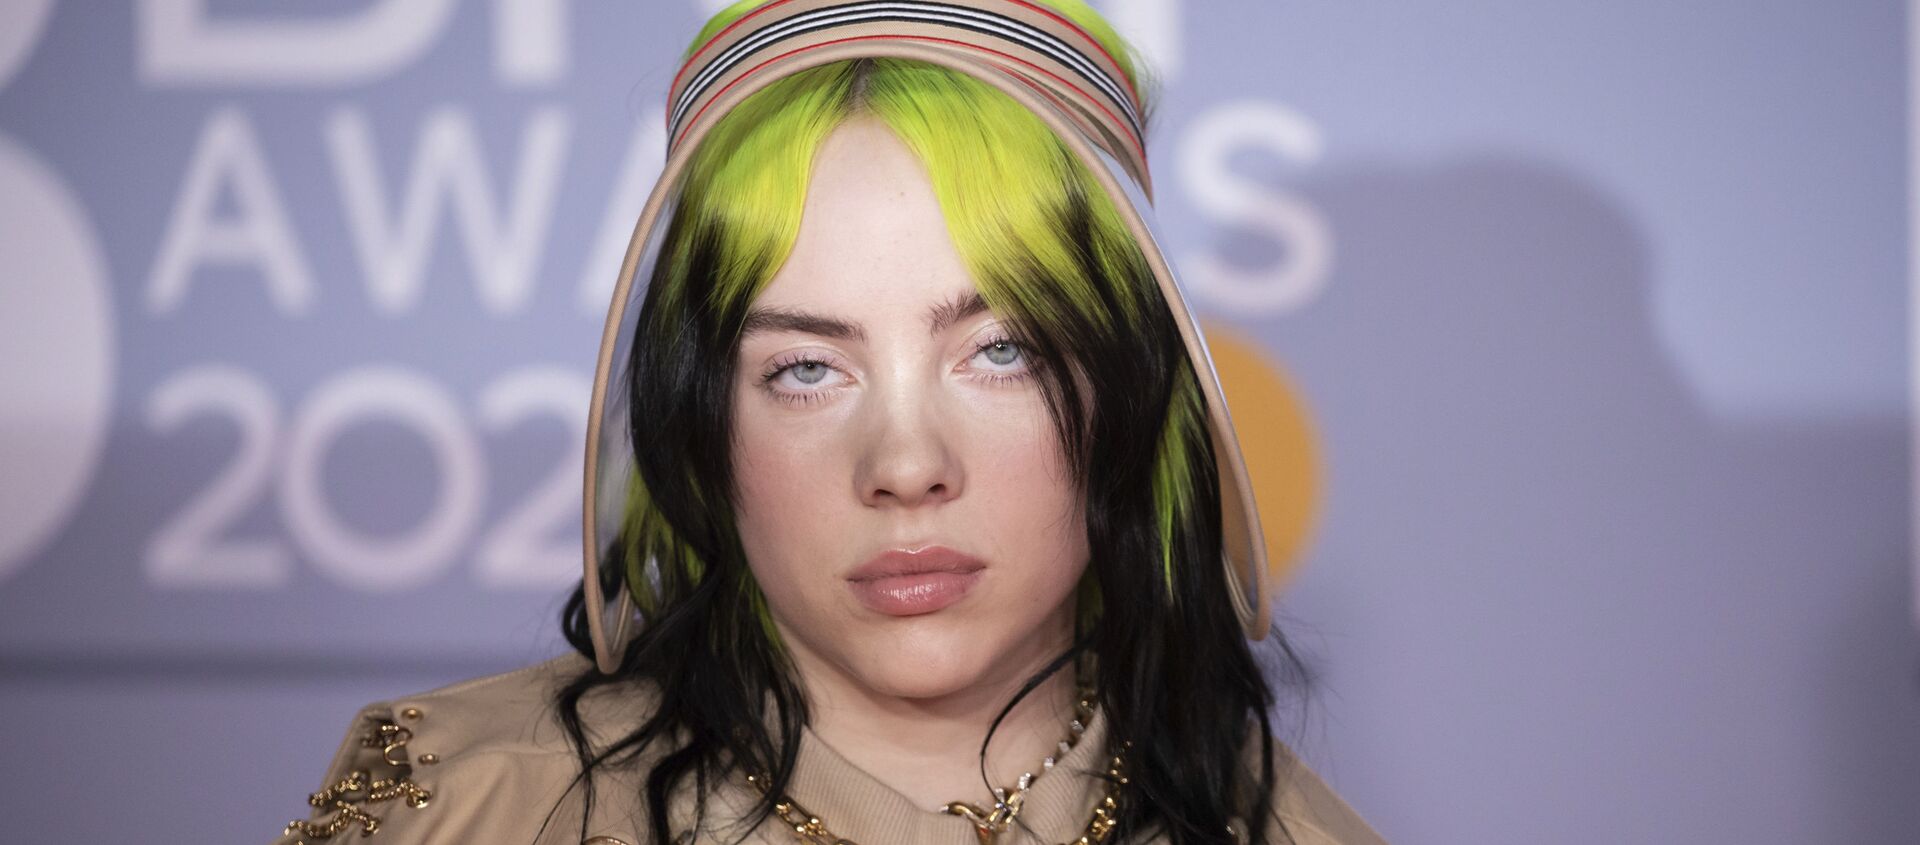 Billie Eilish poses for photographers upon arrival at Brit Awards 2020 in London, Tuesday, Feb. 18, 2020. - 俄羅斯衛星通訊社, 1920, 22.06.2021